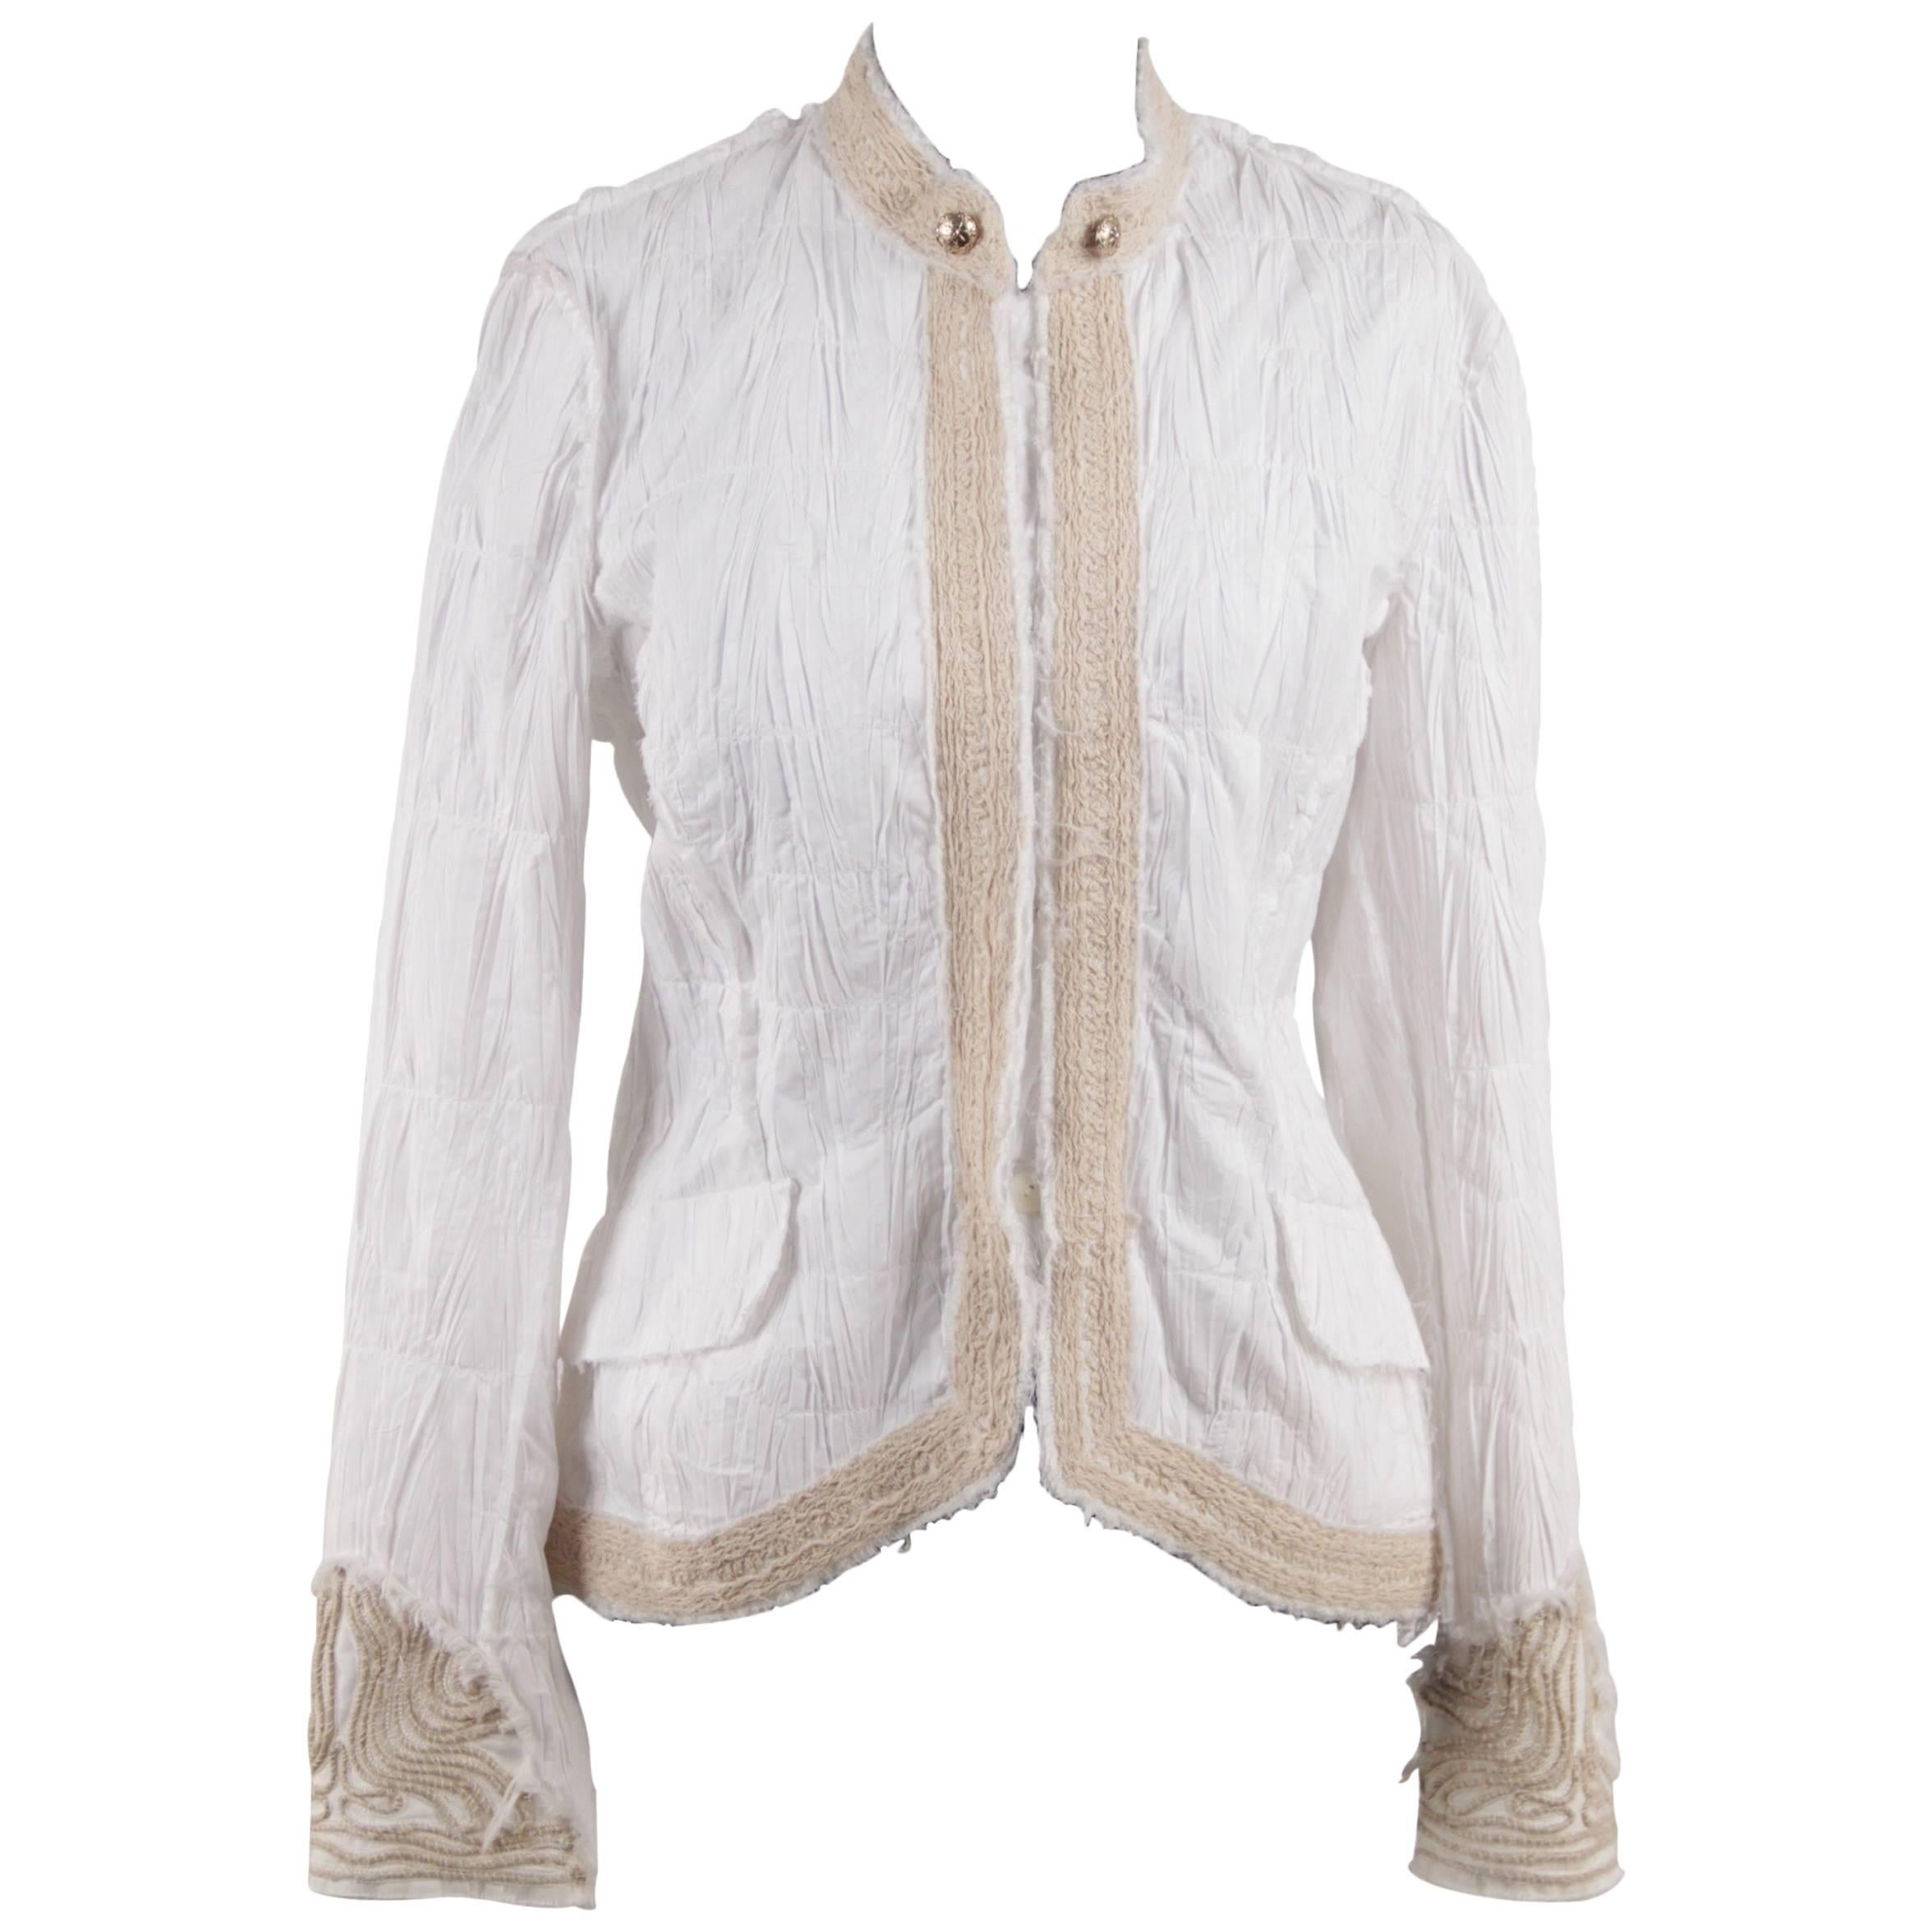 ERMANNO DAELLI White Crinckled COLLARLESS JACKET w/ Embroidery SIZE 44